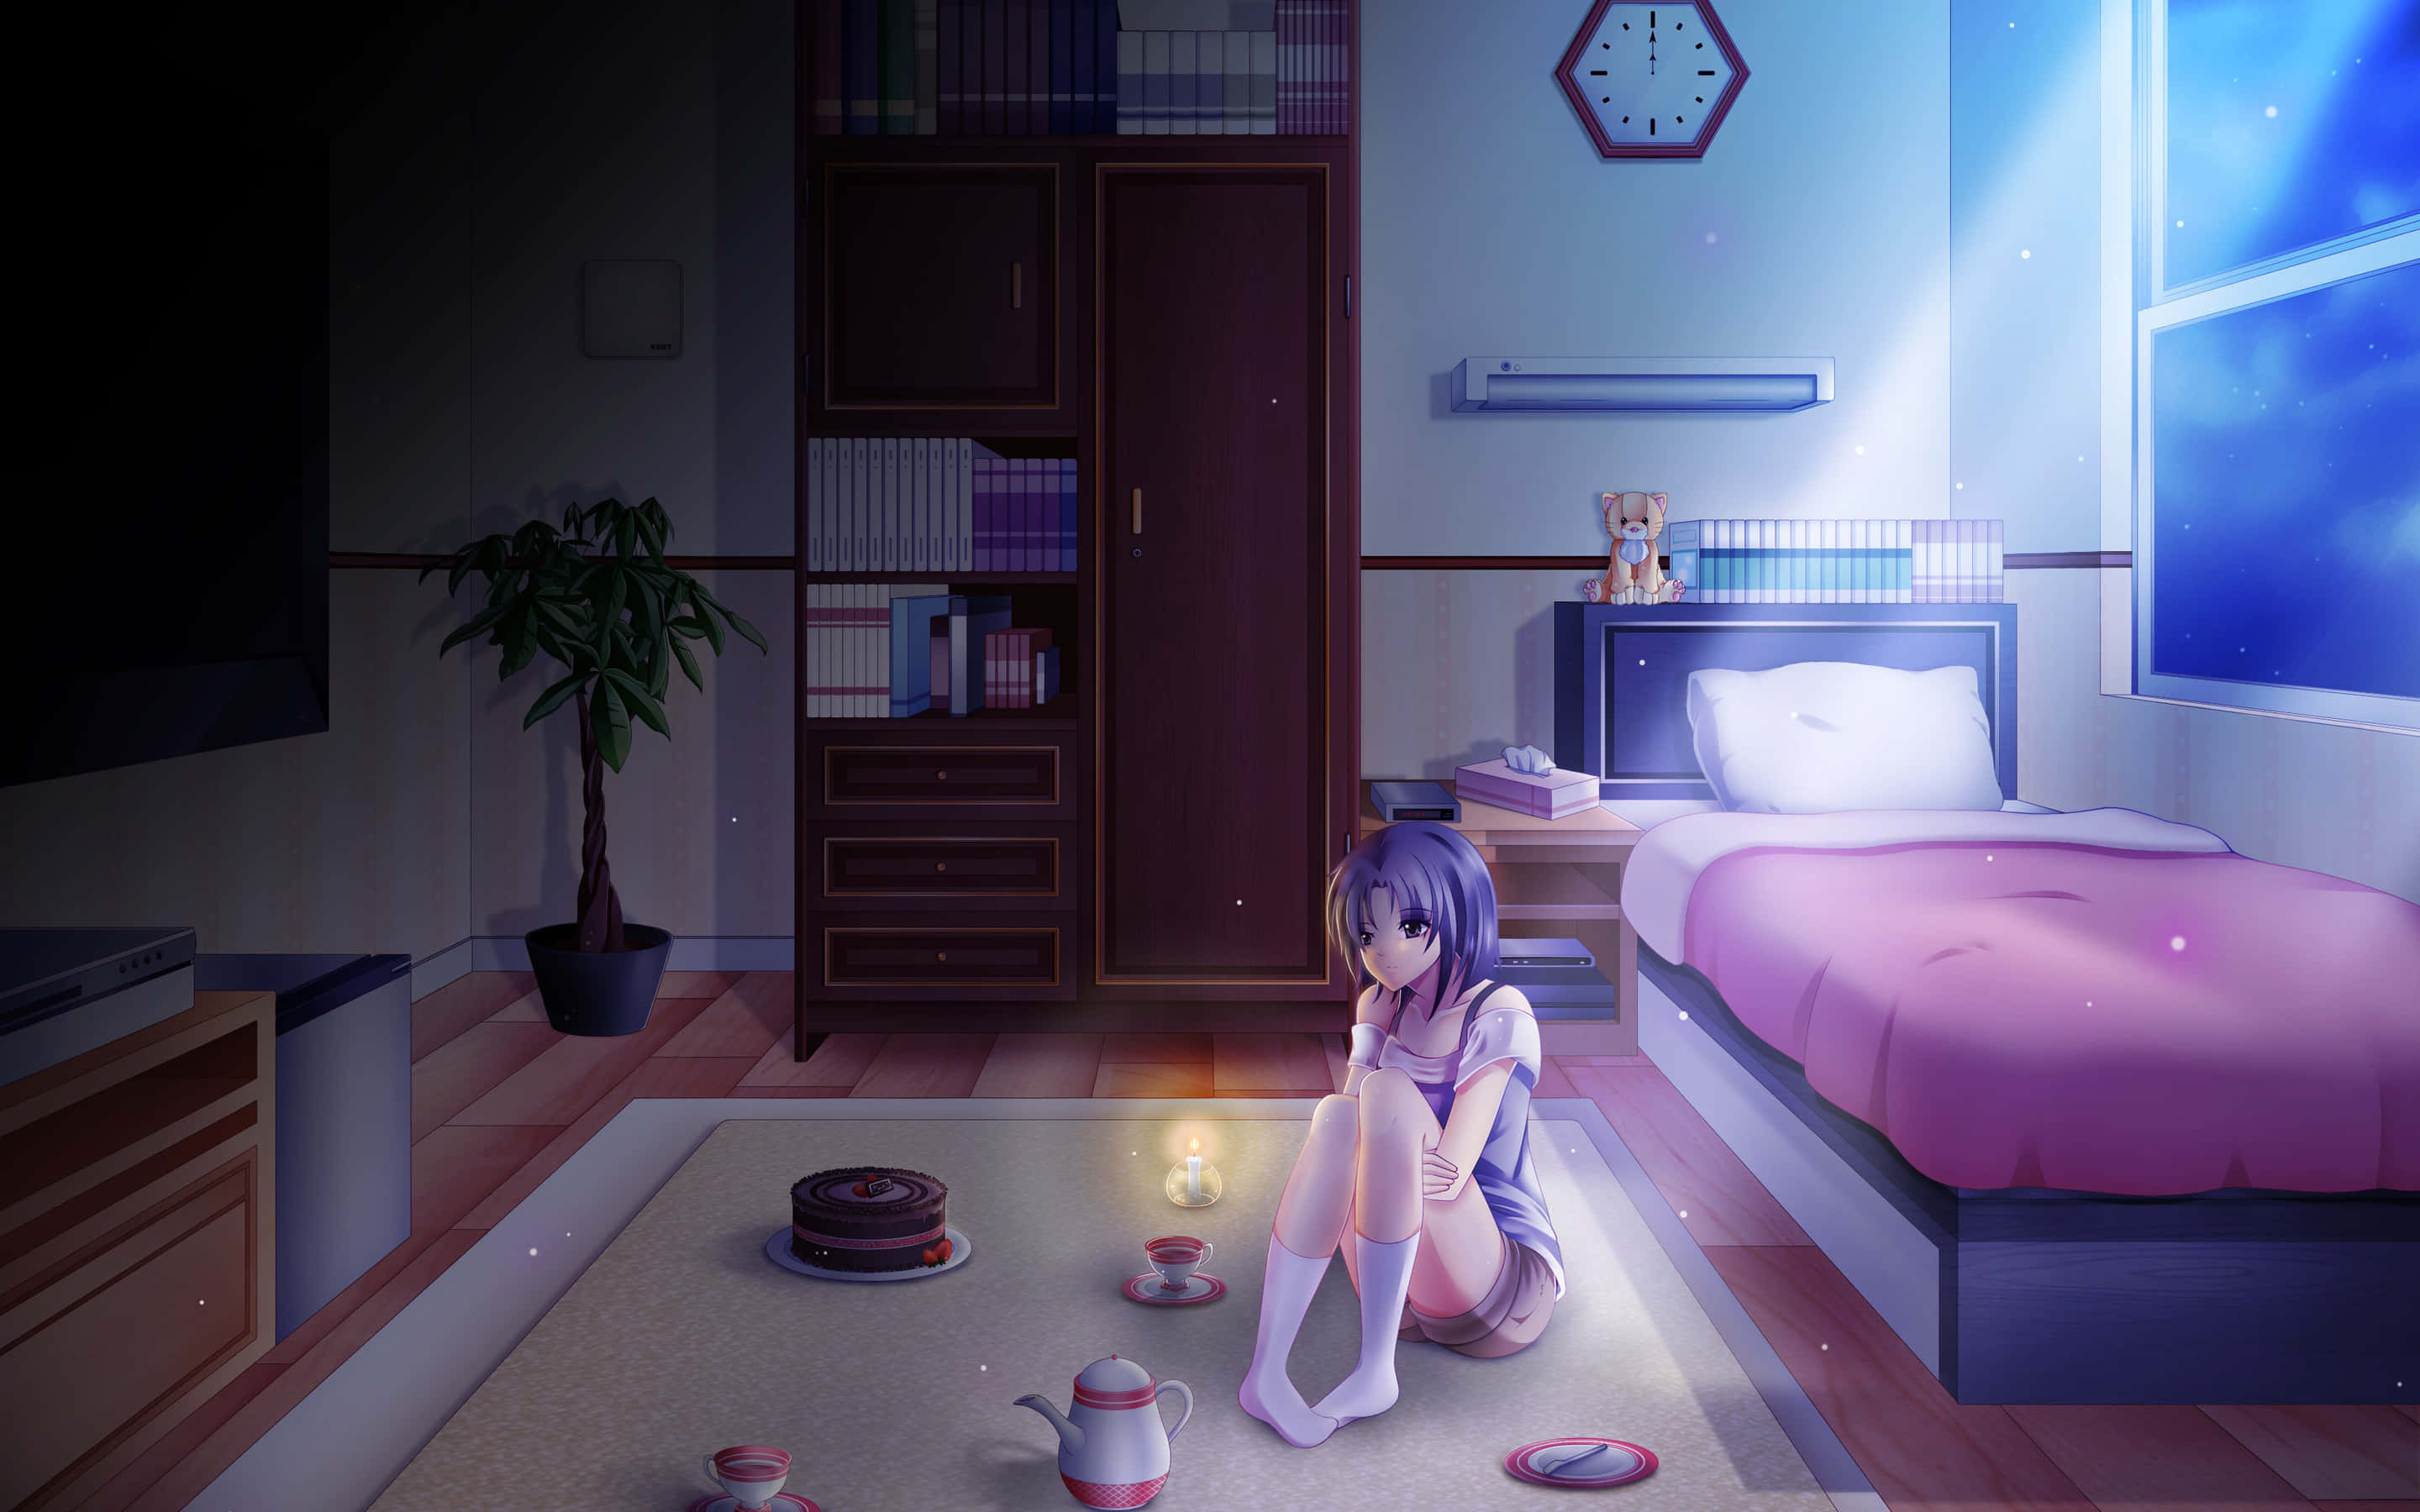 Escape to a world of tranquility with this beautiful Anime bedroom wallpaper.